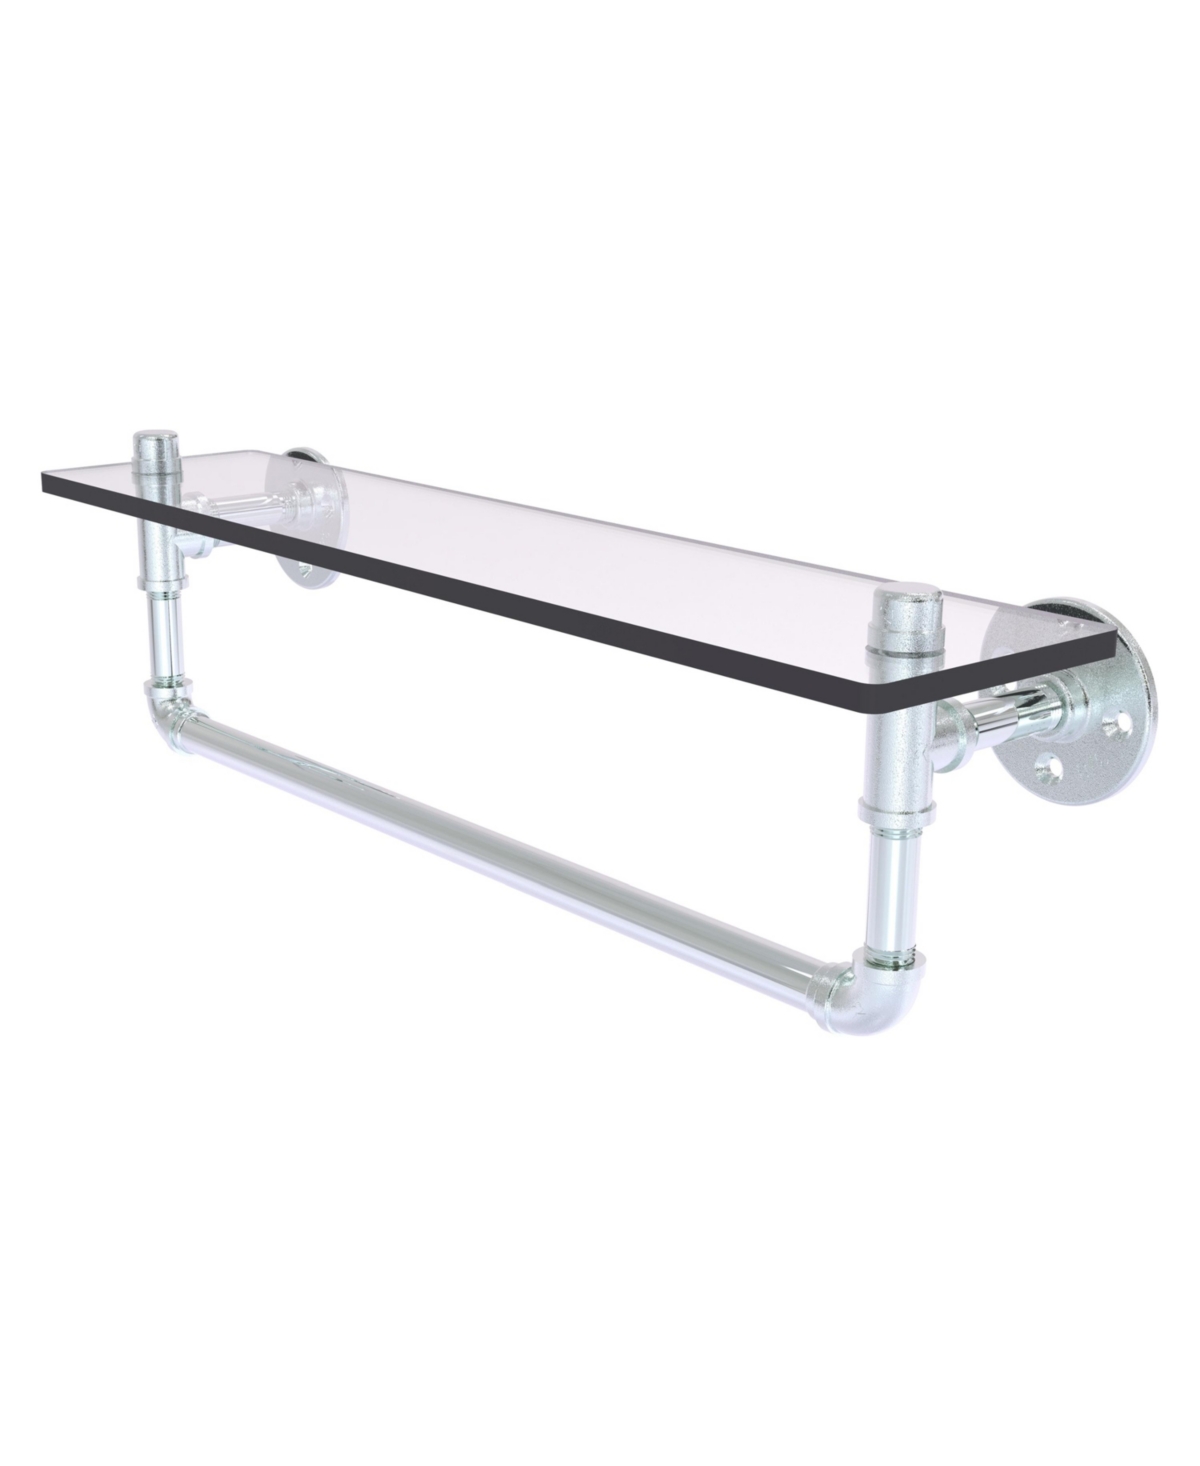 Allied Brass Pipeline Collection 22 Inch Glass Shelf With Towel Bar In Polished Chrome